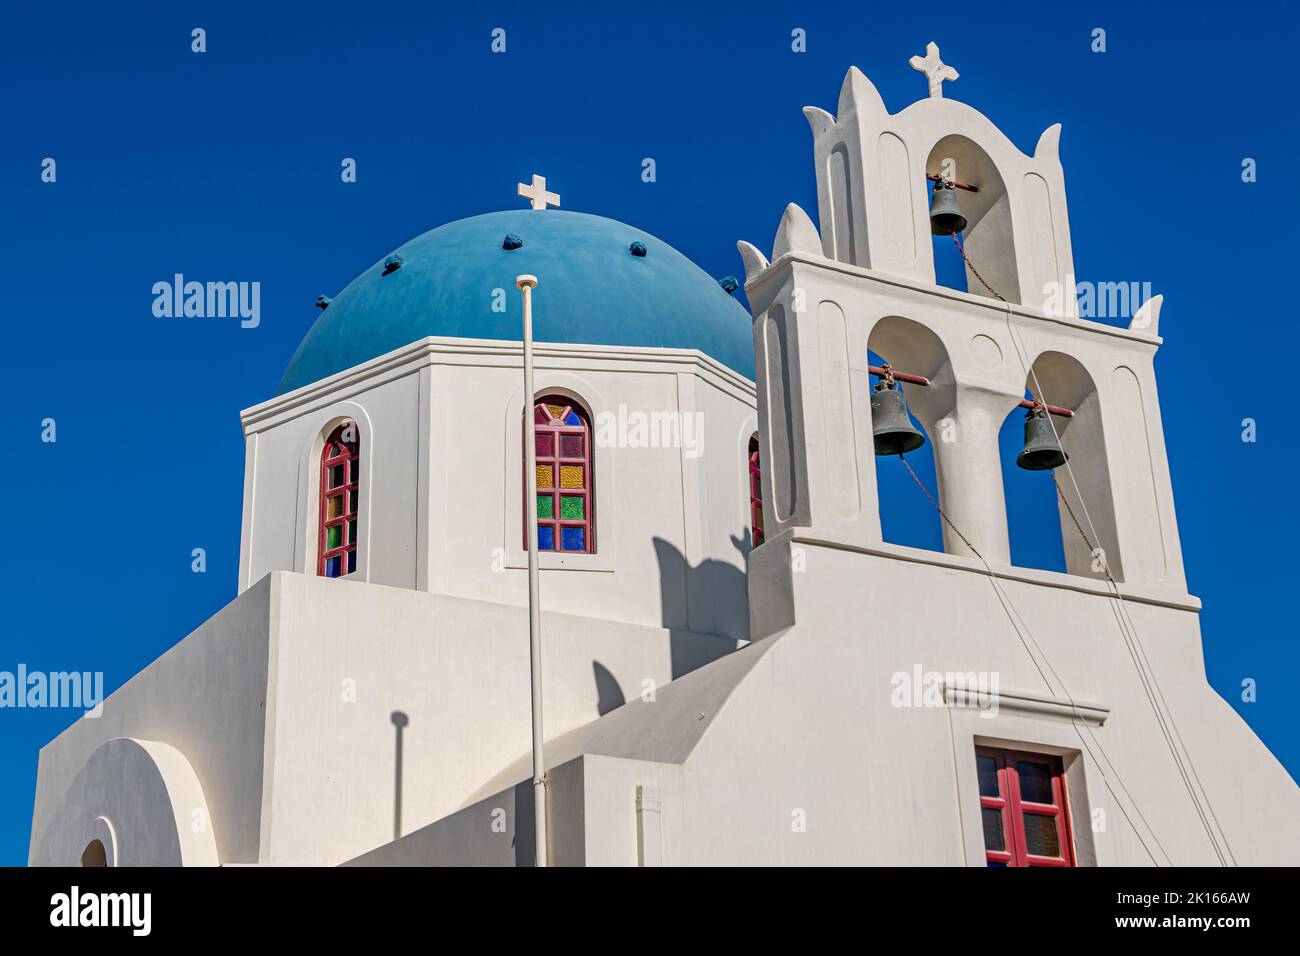 Santorini blue dome churches / coulorful church and white houses with color Stock Photo